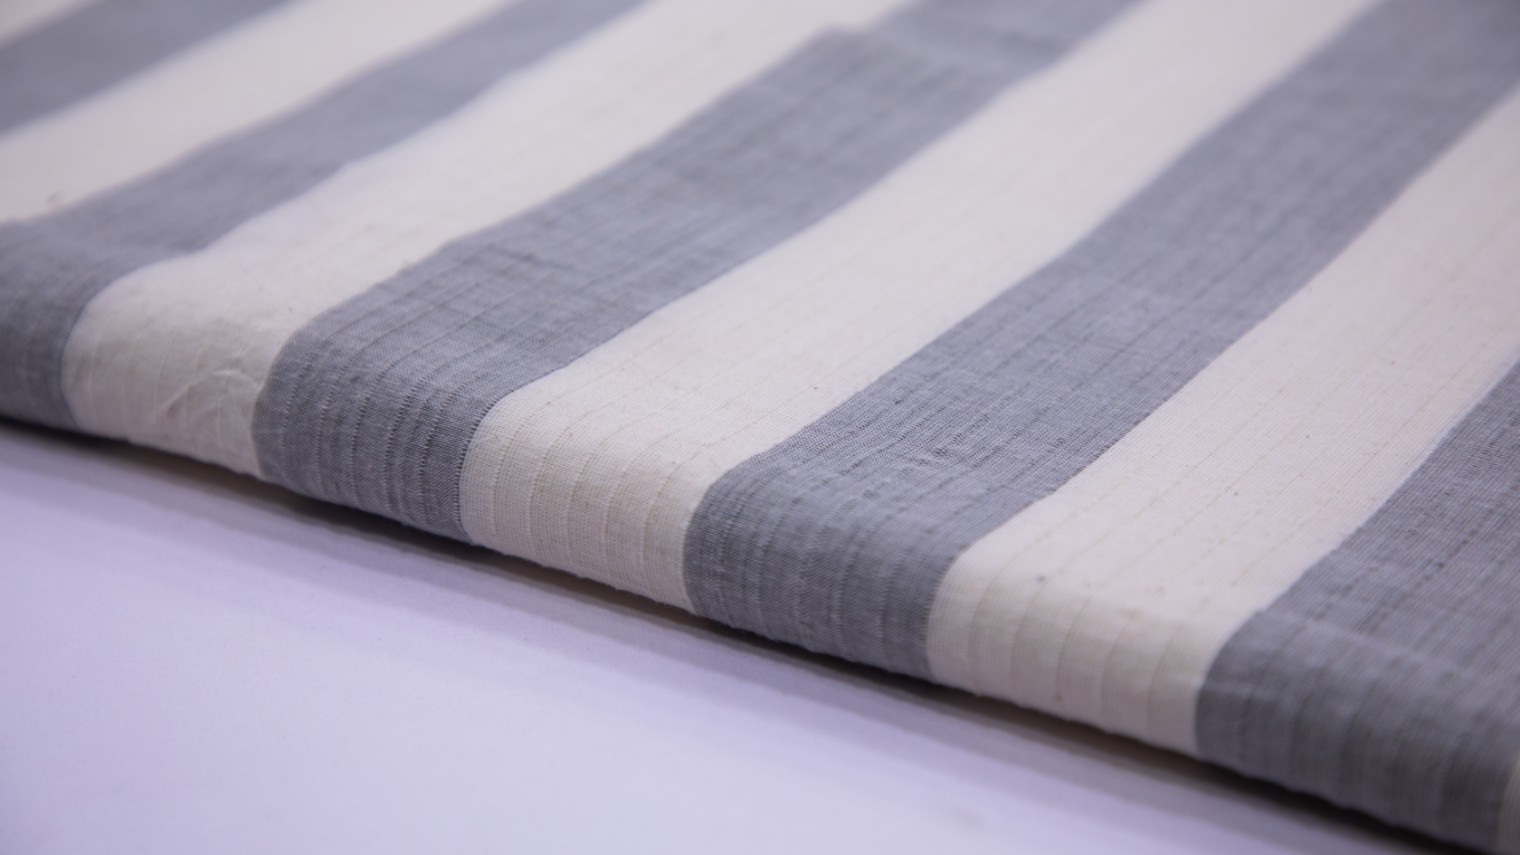 OFF WHITE & GREY COLOR COTTON HANDLOOM STRIPES WEAVE FABRIC - 5738